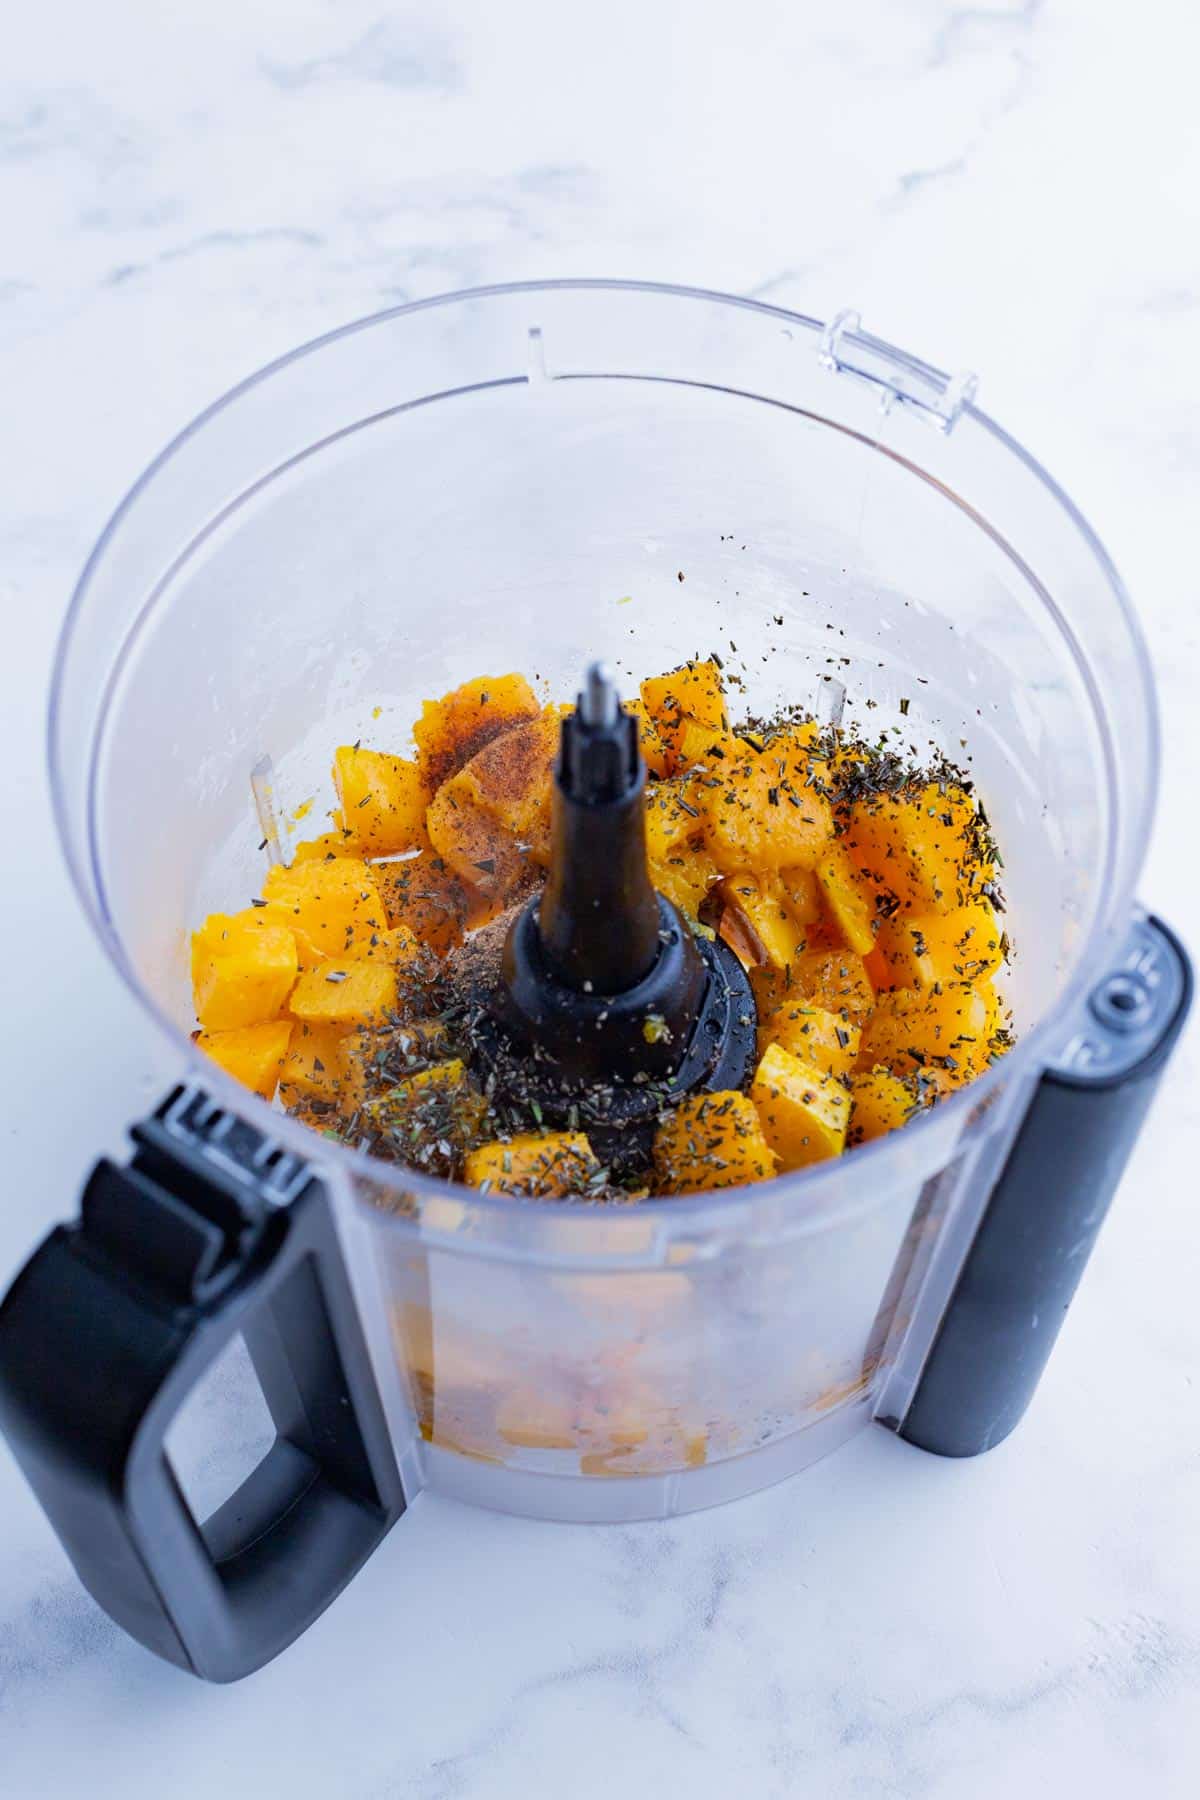 Butternut squash and seasonings are blended in a food processor.